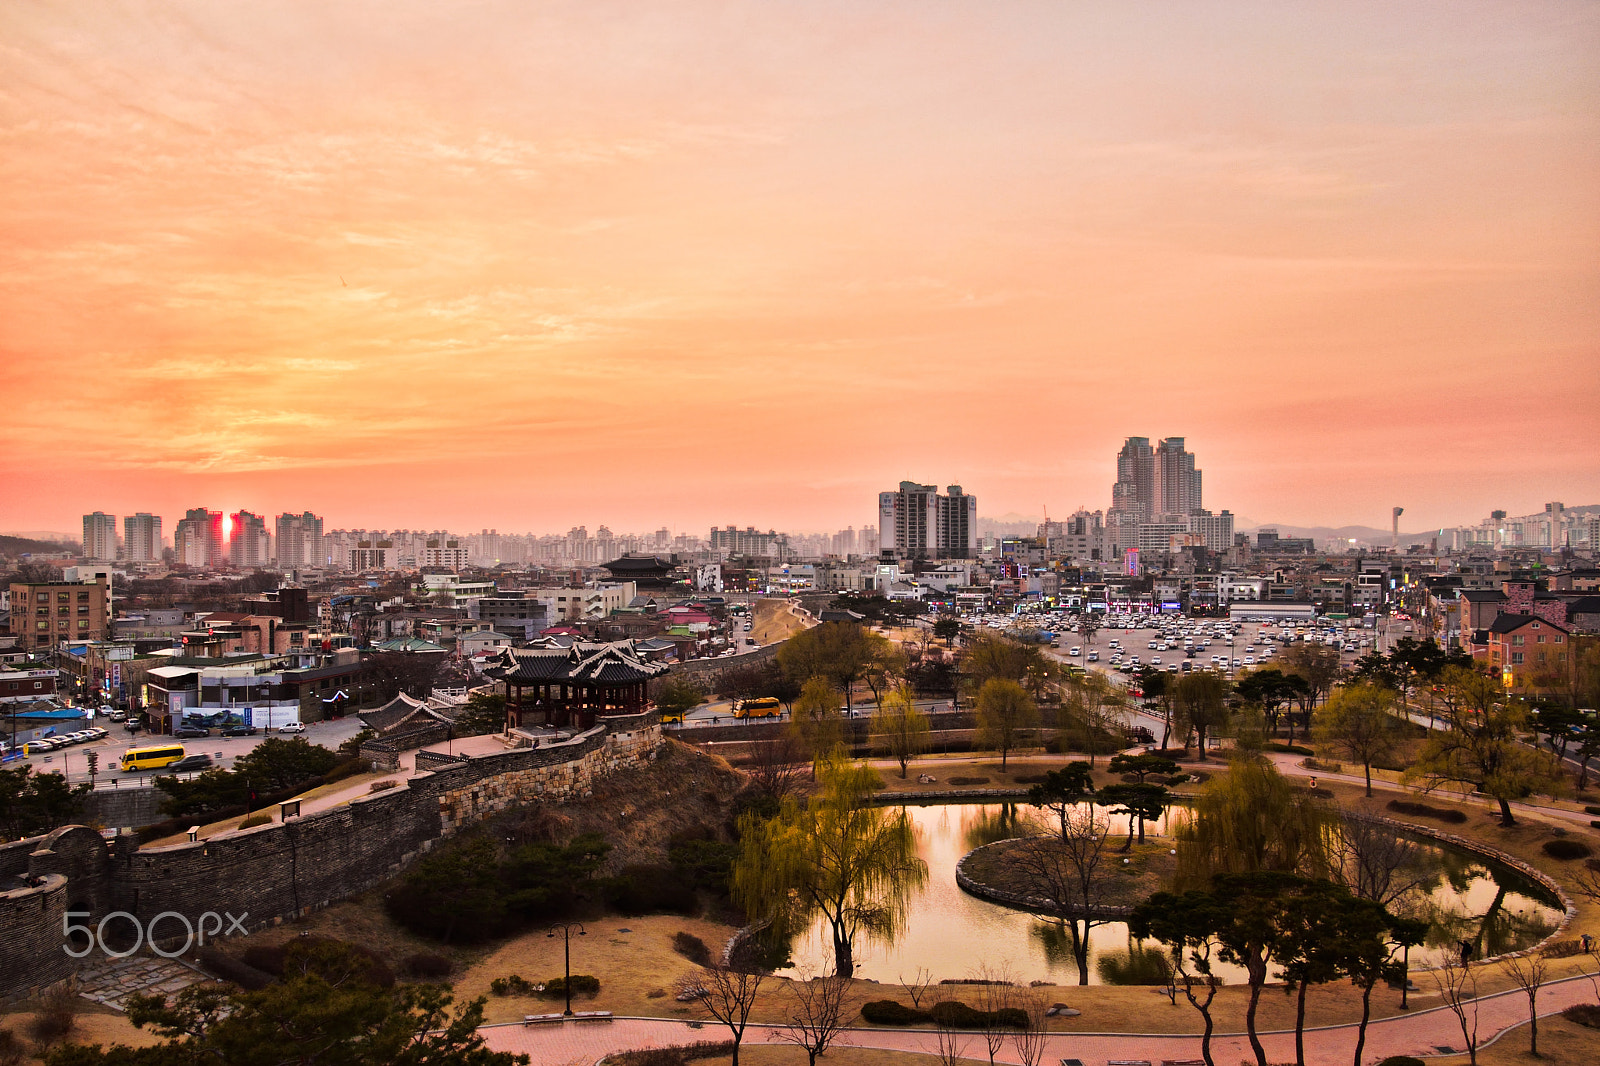 Nikon D5500 + Tamron 16-300mm F3.5-6.3 Di II VC PZD Macro sample photo. The sunset of the city photography